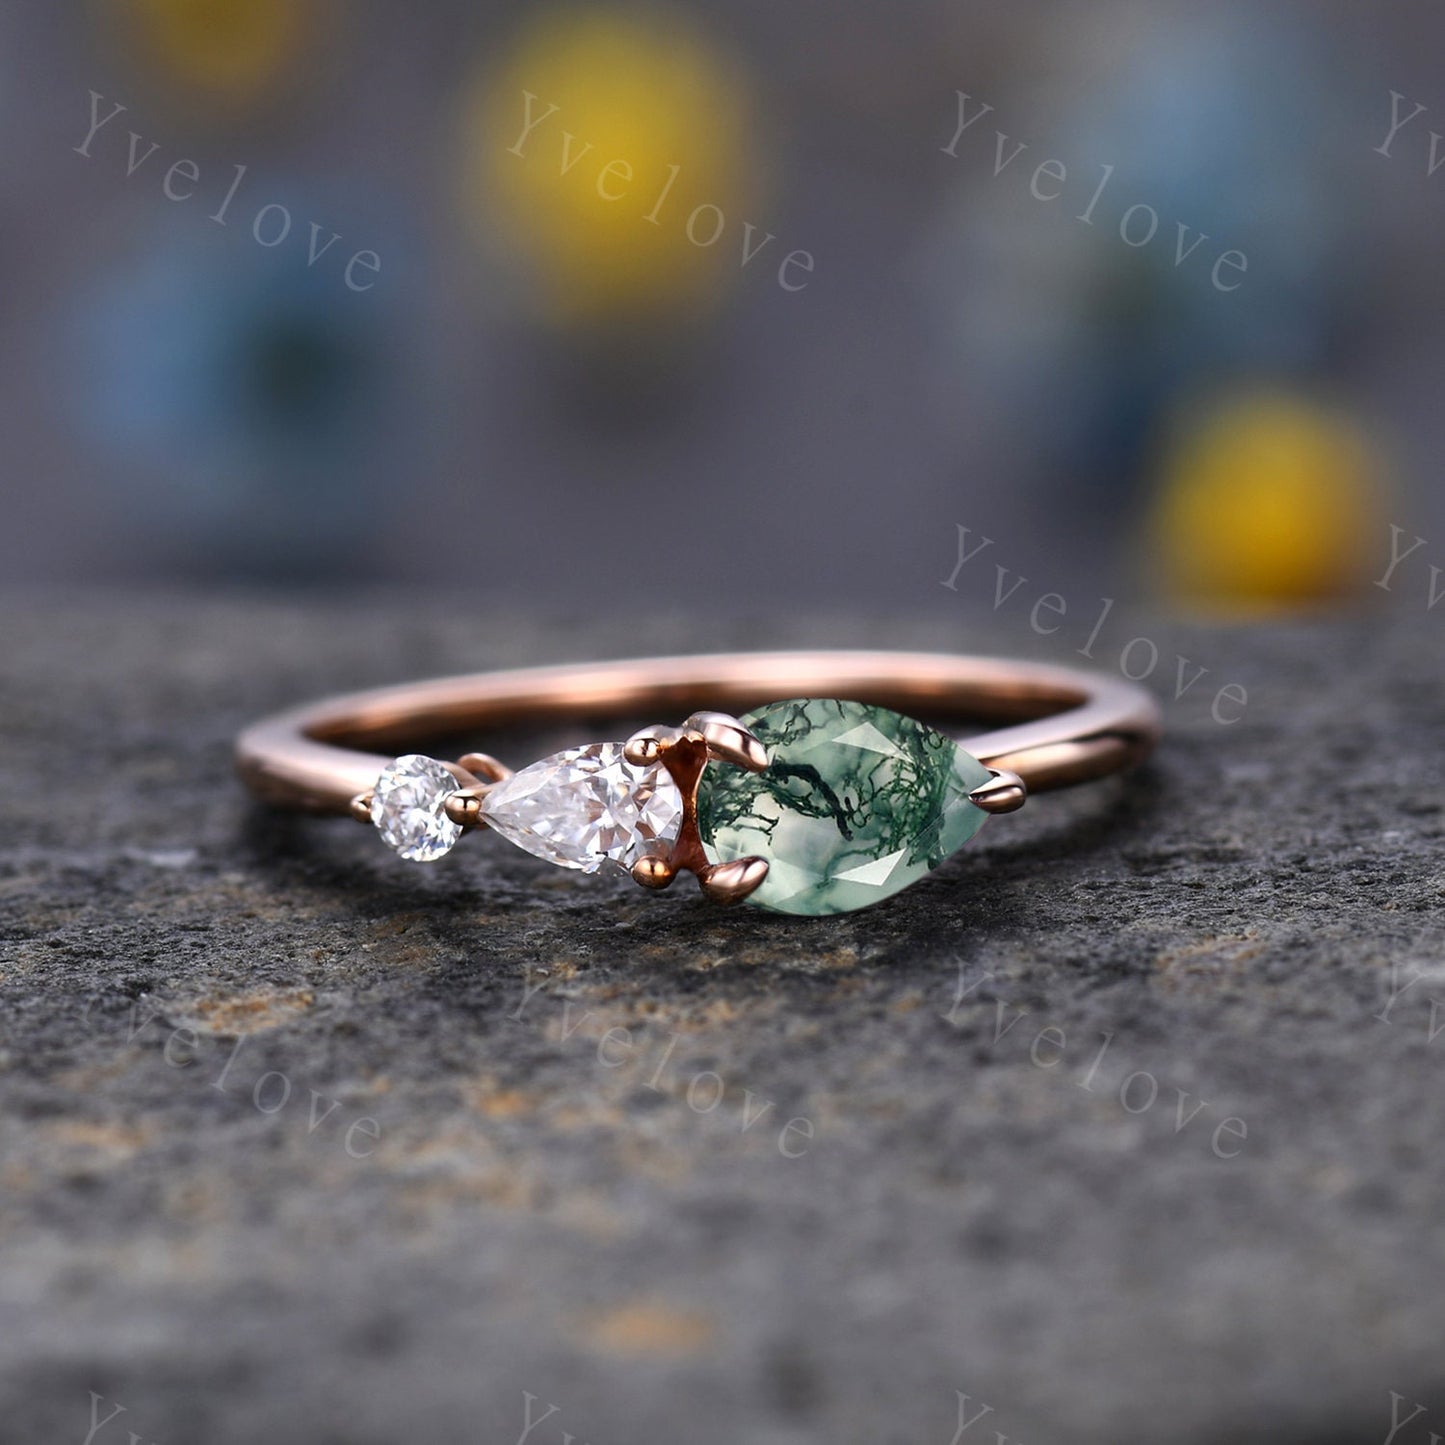 Vintage Moss Agate Ring Engagement Ring,Pear Cut Gems,Art Deco Moissanite Wedding Band,3 Stone Unique Women Bridal Promise Ring,Rose gold